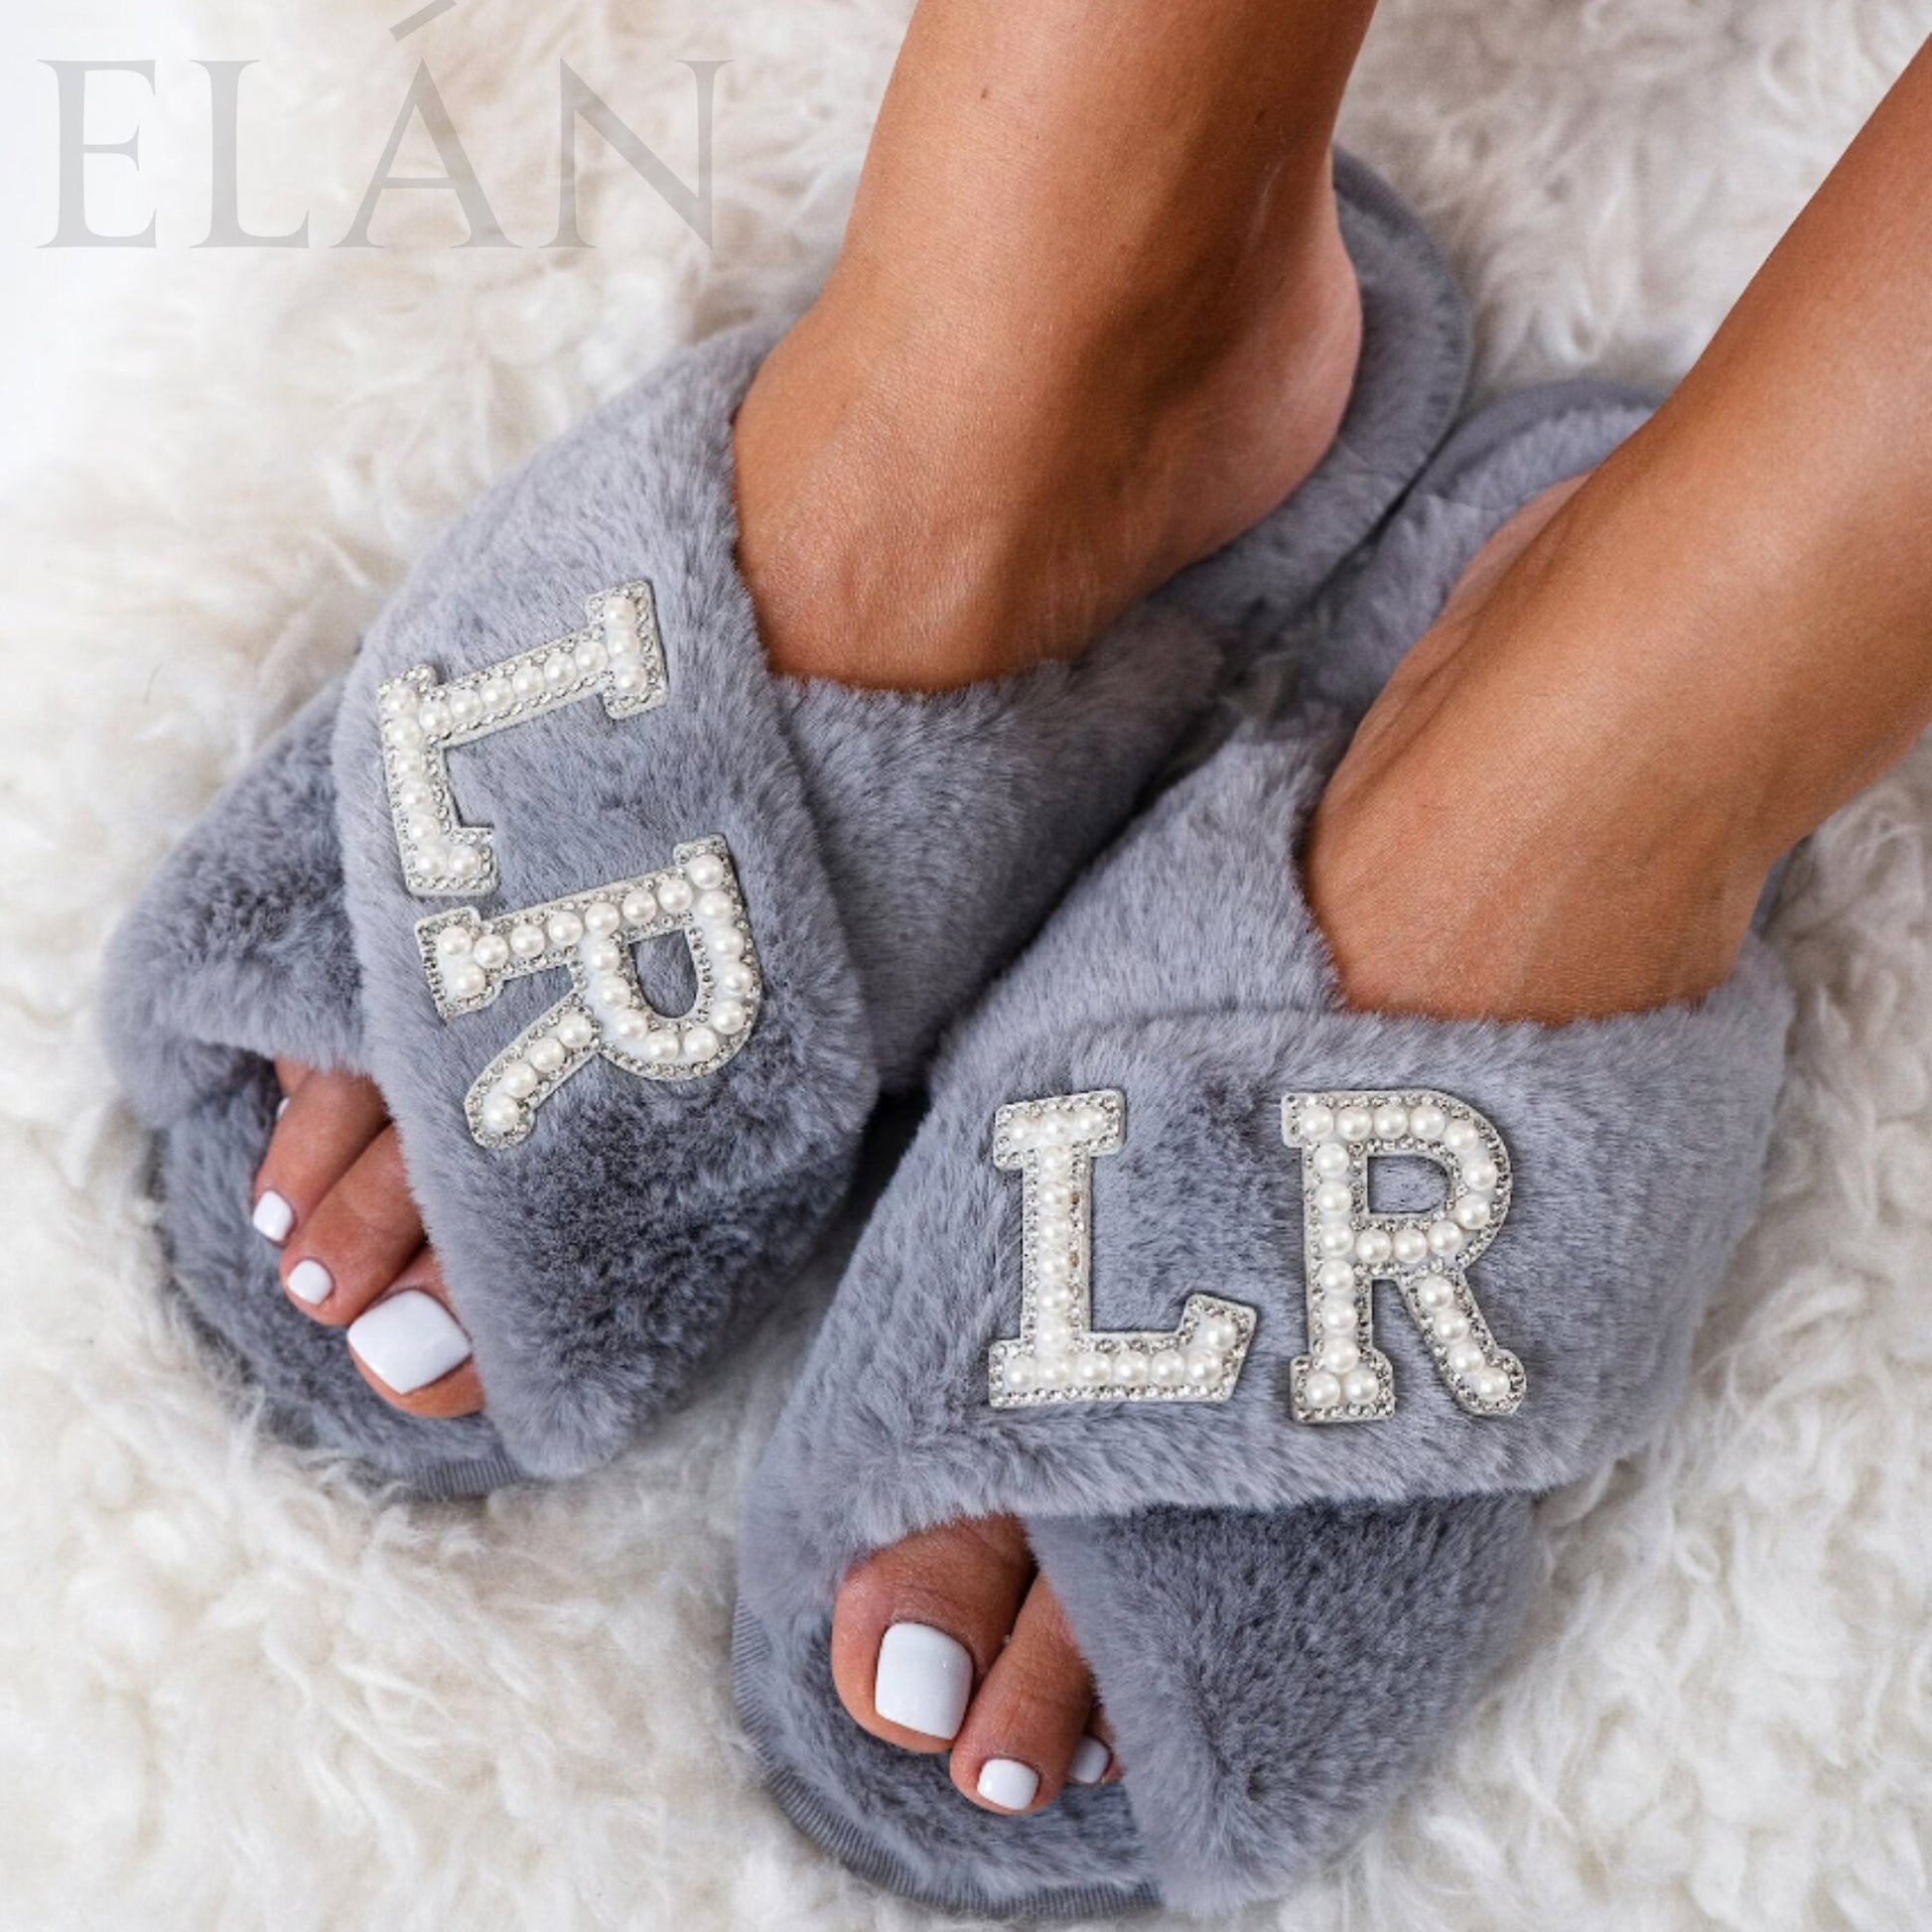 Custom Fluffy Slippers Bridal Shower Favors Personalized Bridal Mrs. Pearls Sparkly Comfy Faux Furry Slippers Wedding Bridesmaid Gifts Maid